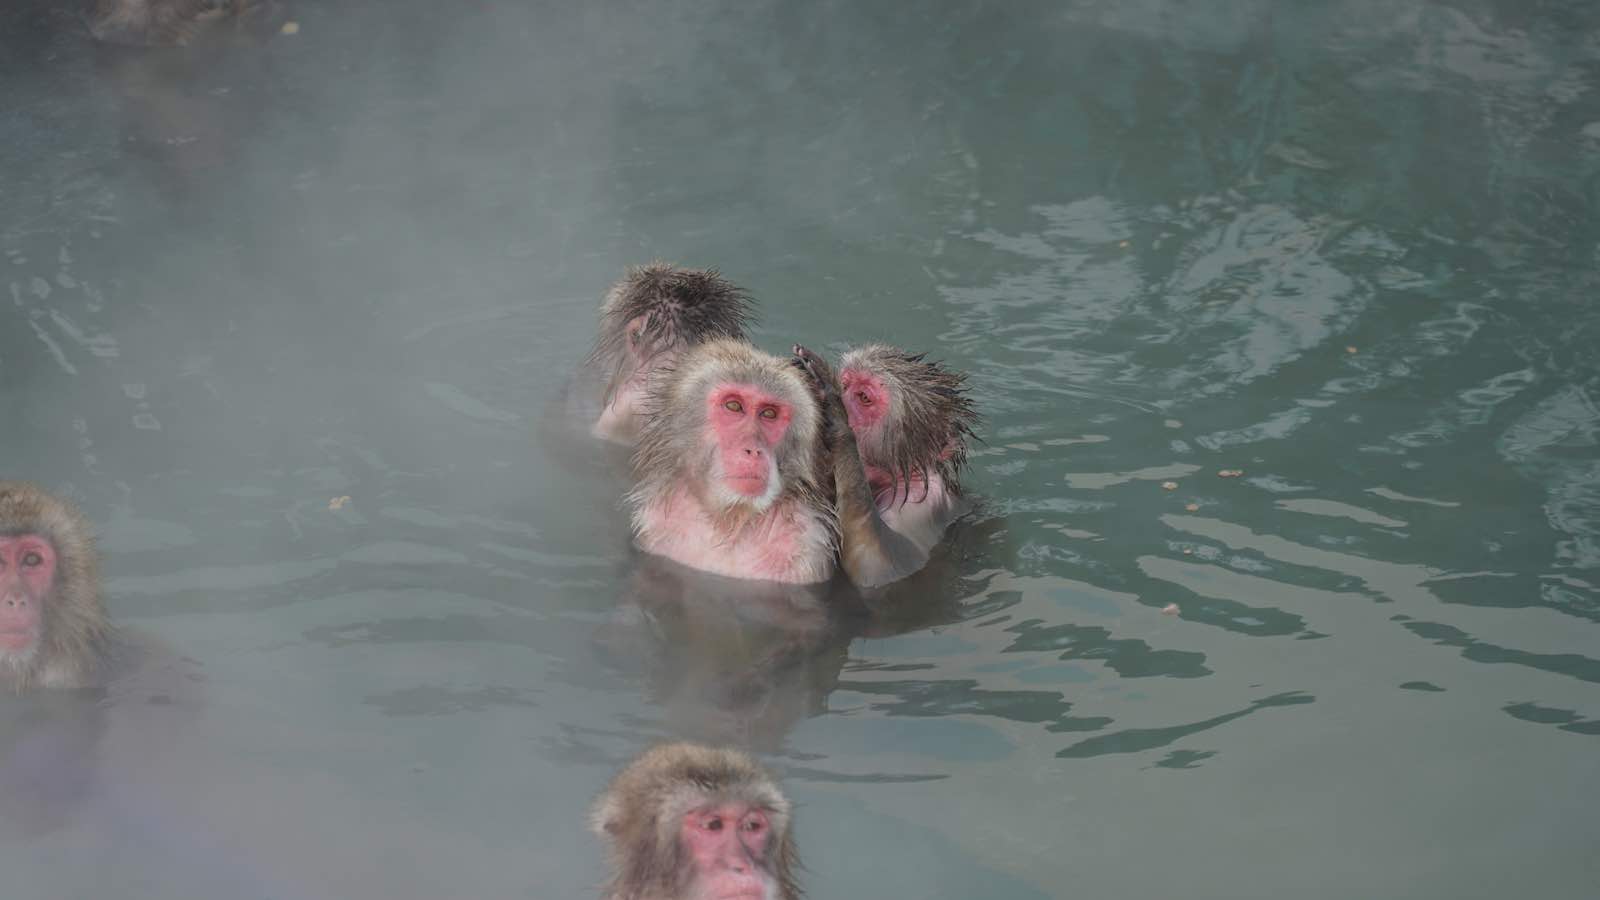 There was a hot spring in the city with snow monkeys so I went to check that out. It was a lot of fun watching the monkeys, they had the most human looking expressions which was really cute but also slightly jarring.